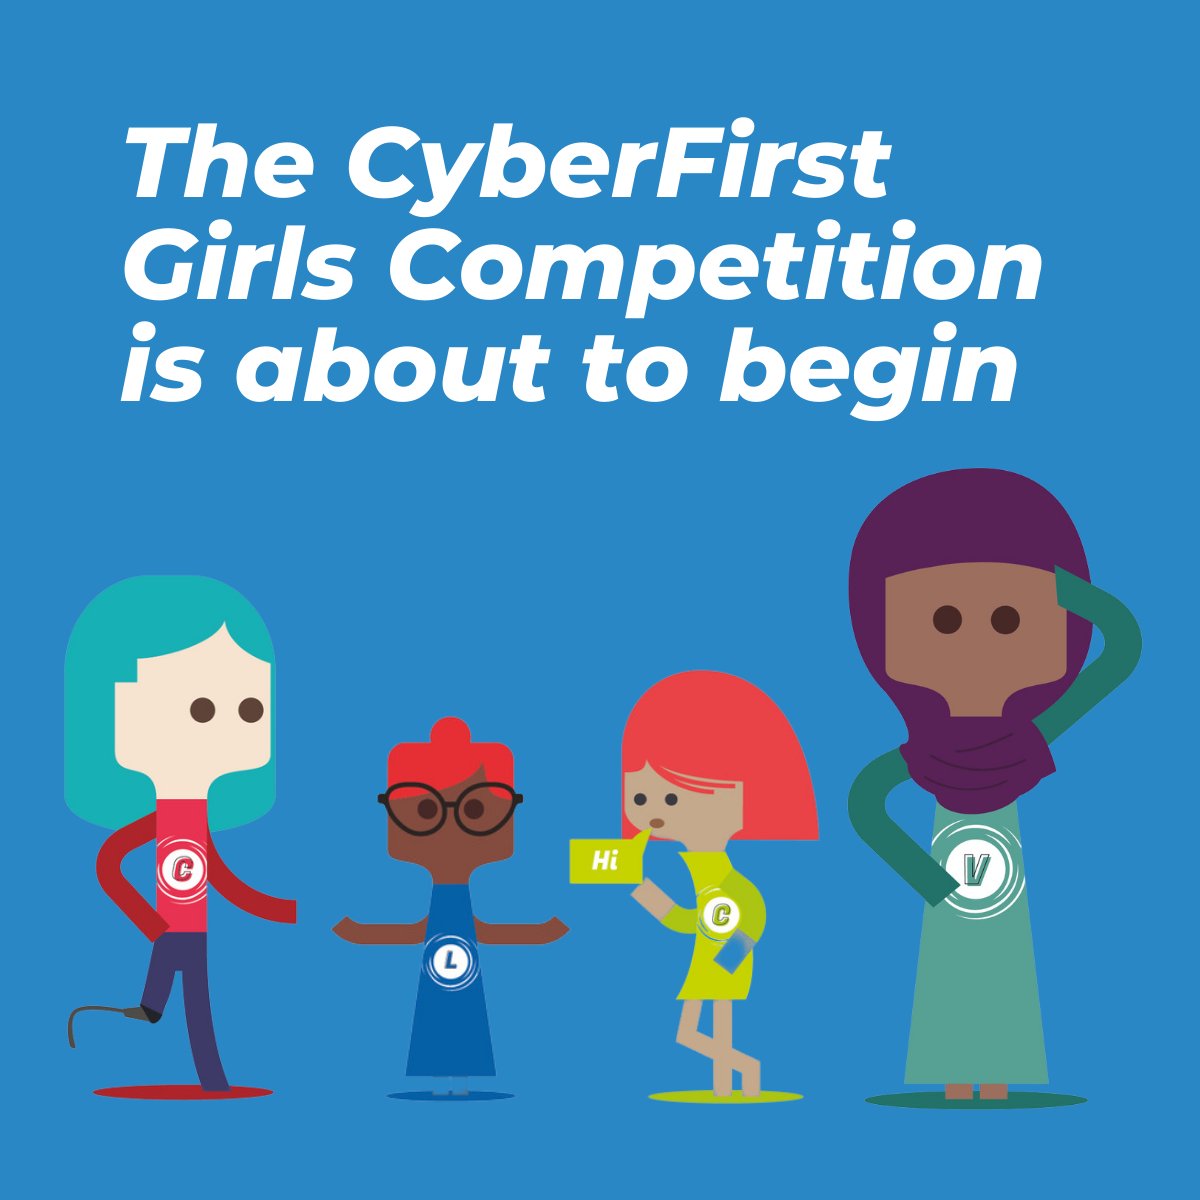 We're excited to be hosting the #CyberFirst Girls Competition for the North East. Teams of school girls from across the region will be joining us today for a day of codebreaking and cyber fun! Follow all the action at @NCSC 👾